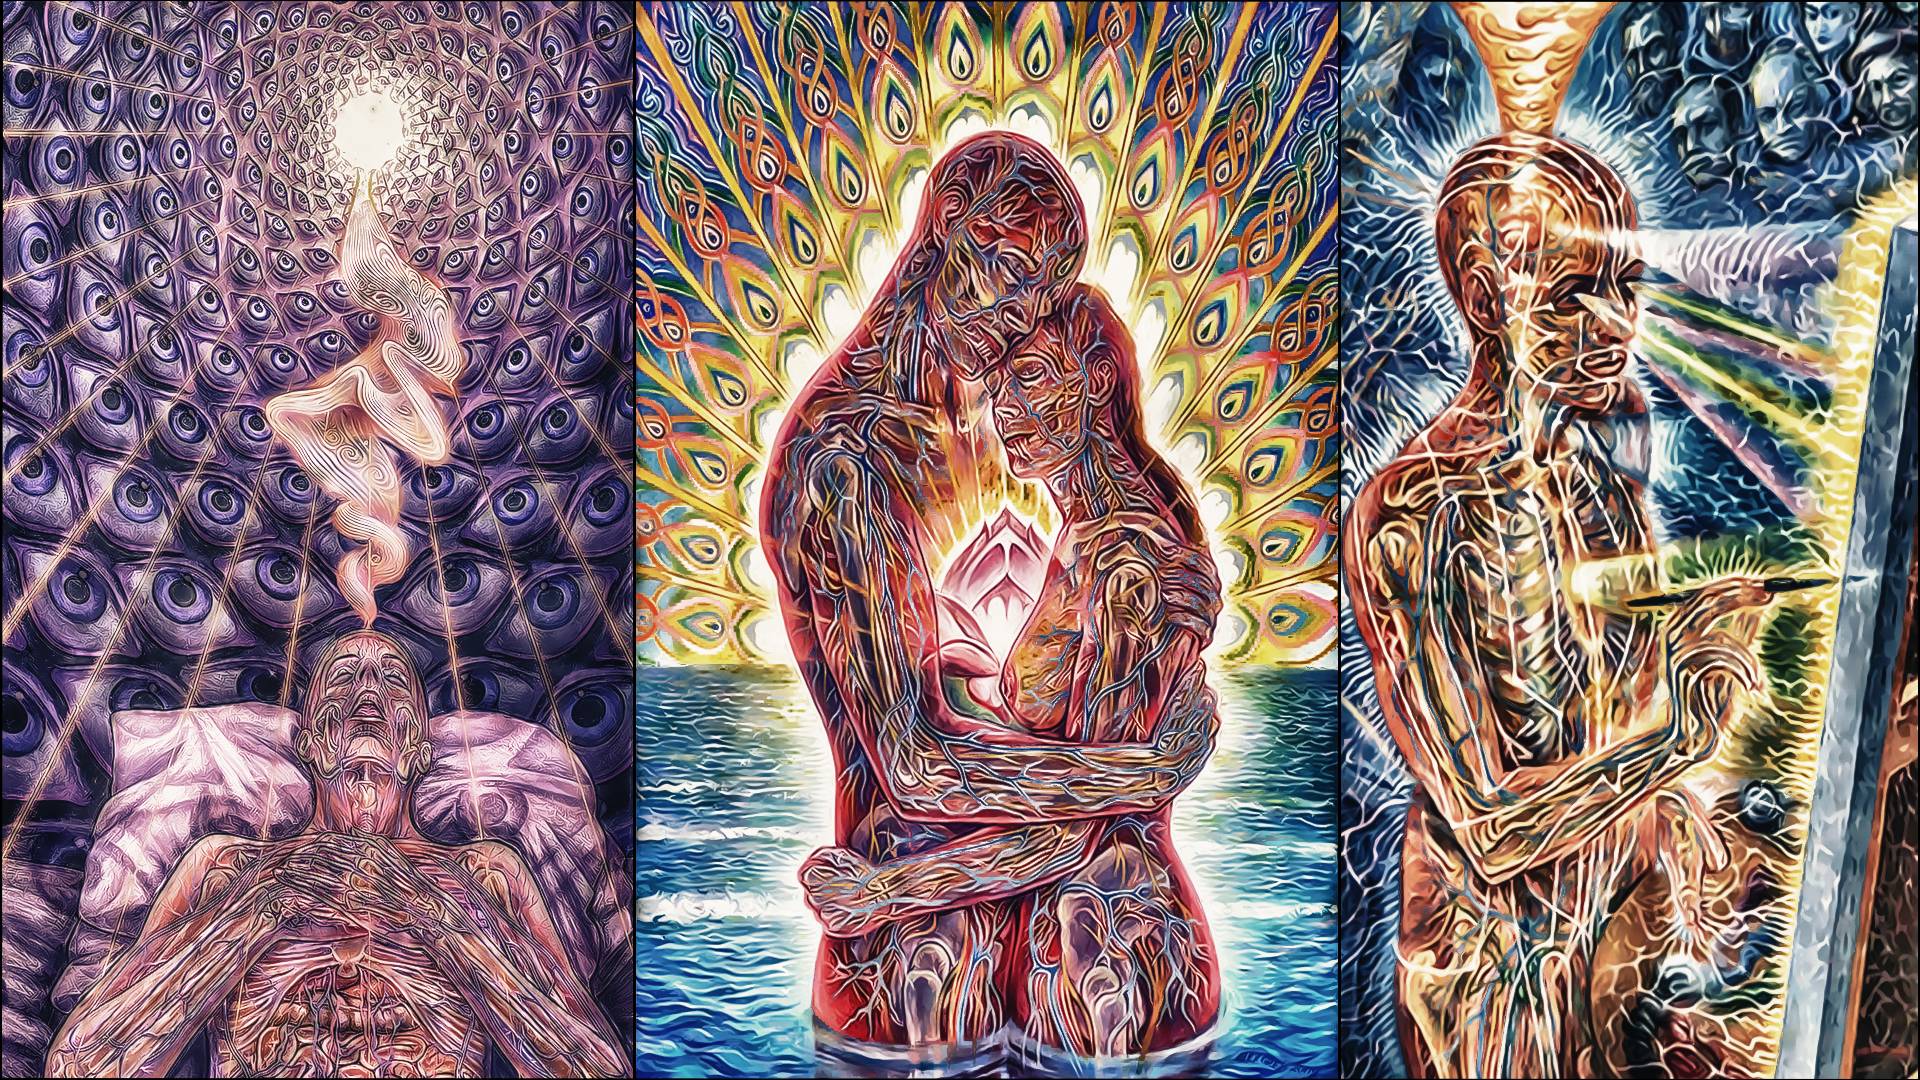 Wallpaper I just made combining 3 Alex Grey paintings 1920x1080